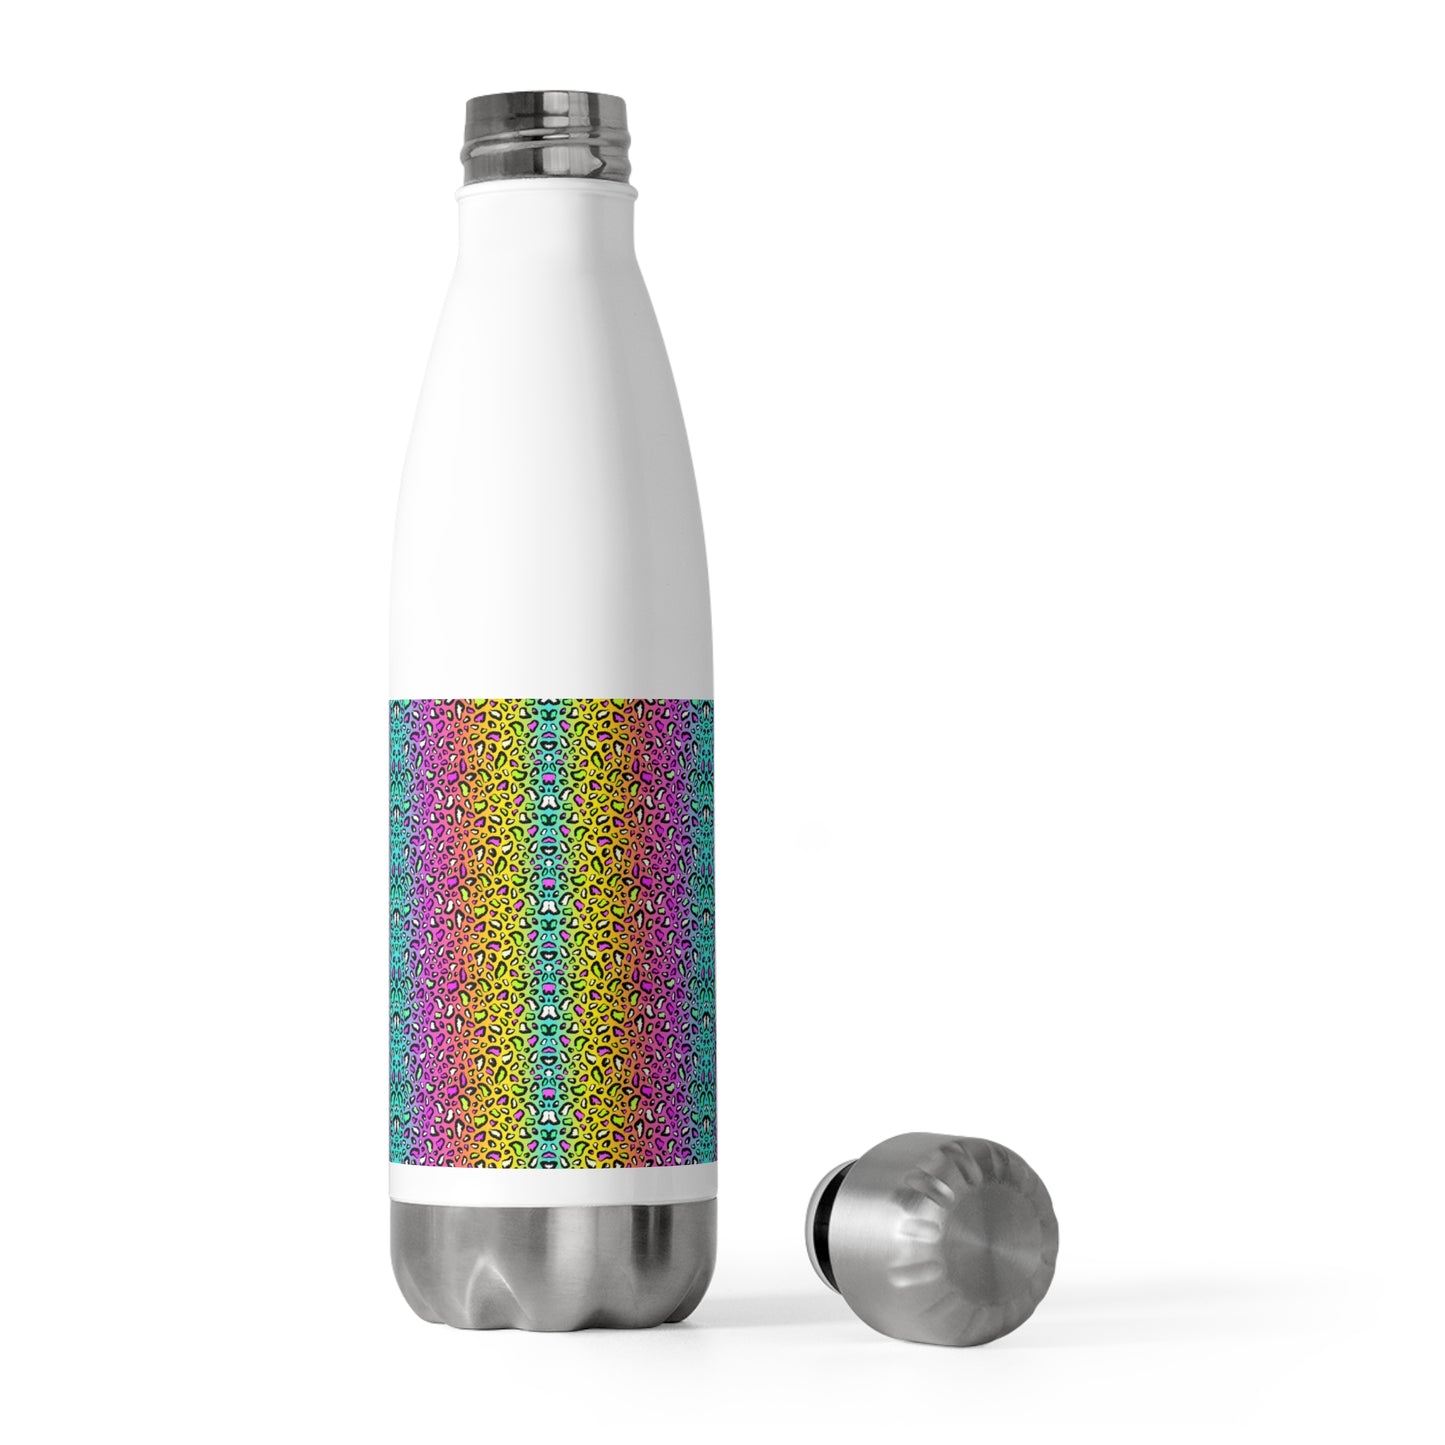 Niccie's Vibrant 20oz Insulated Bottle with Neon Pattern